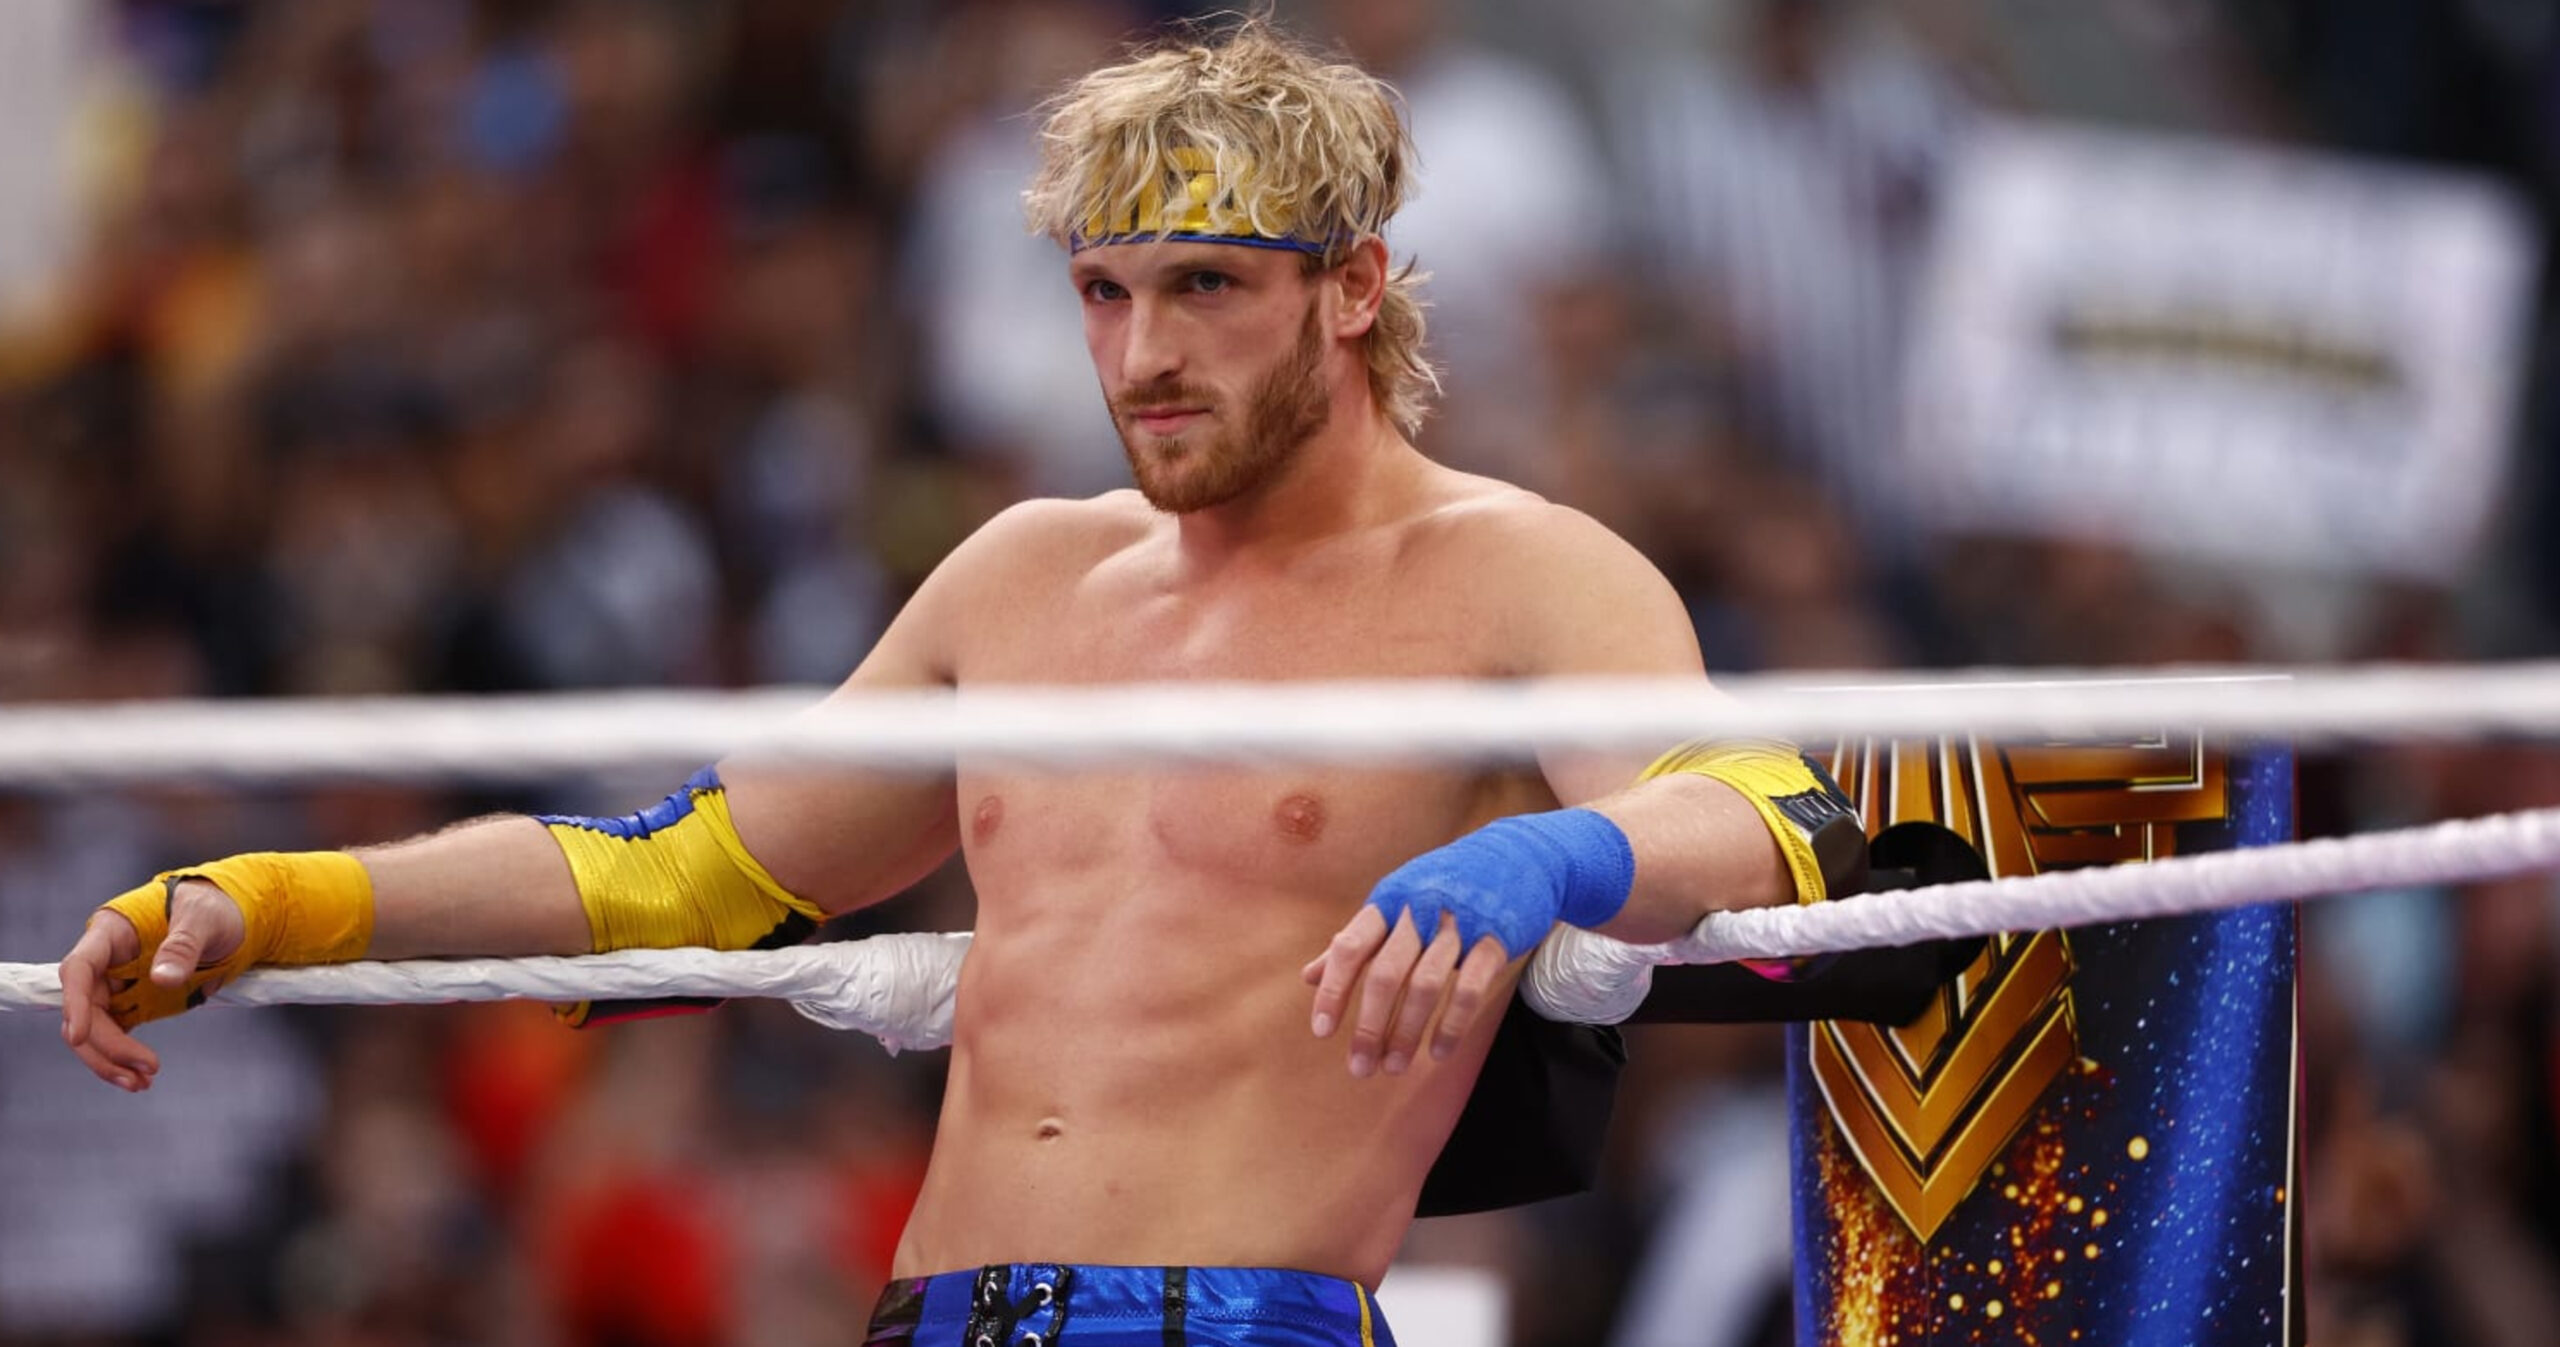 Logan Paul Discusses His Journey to Success in WWE & Boxing